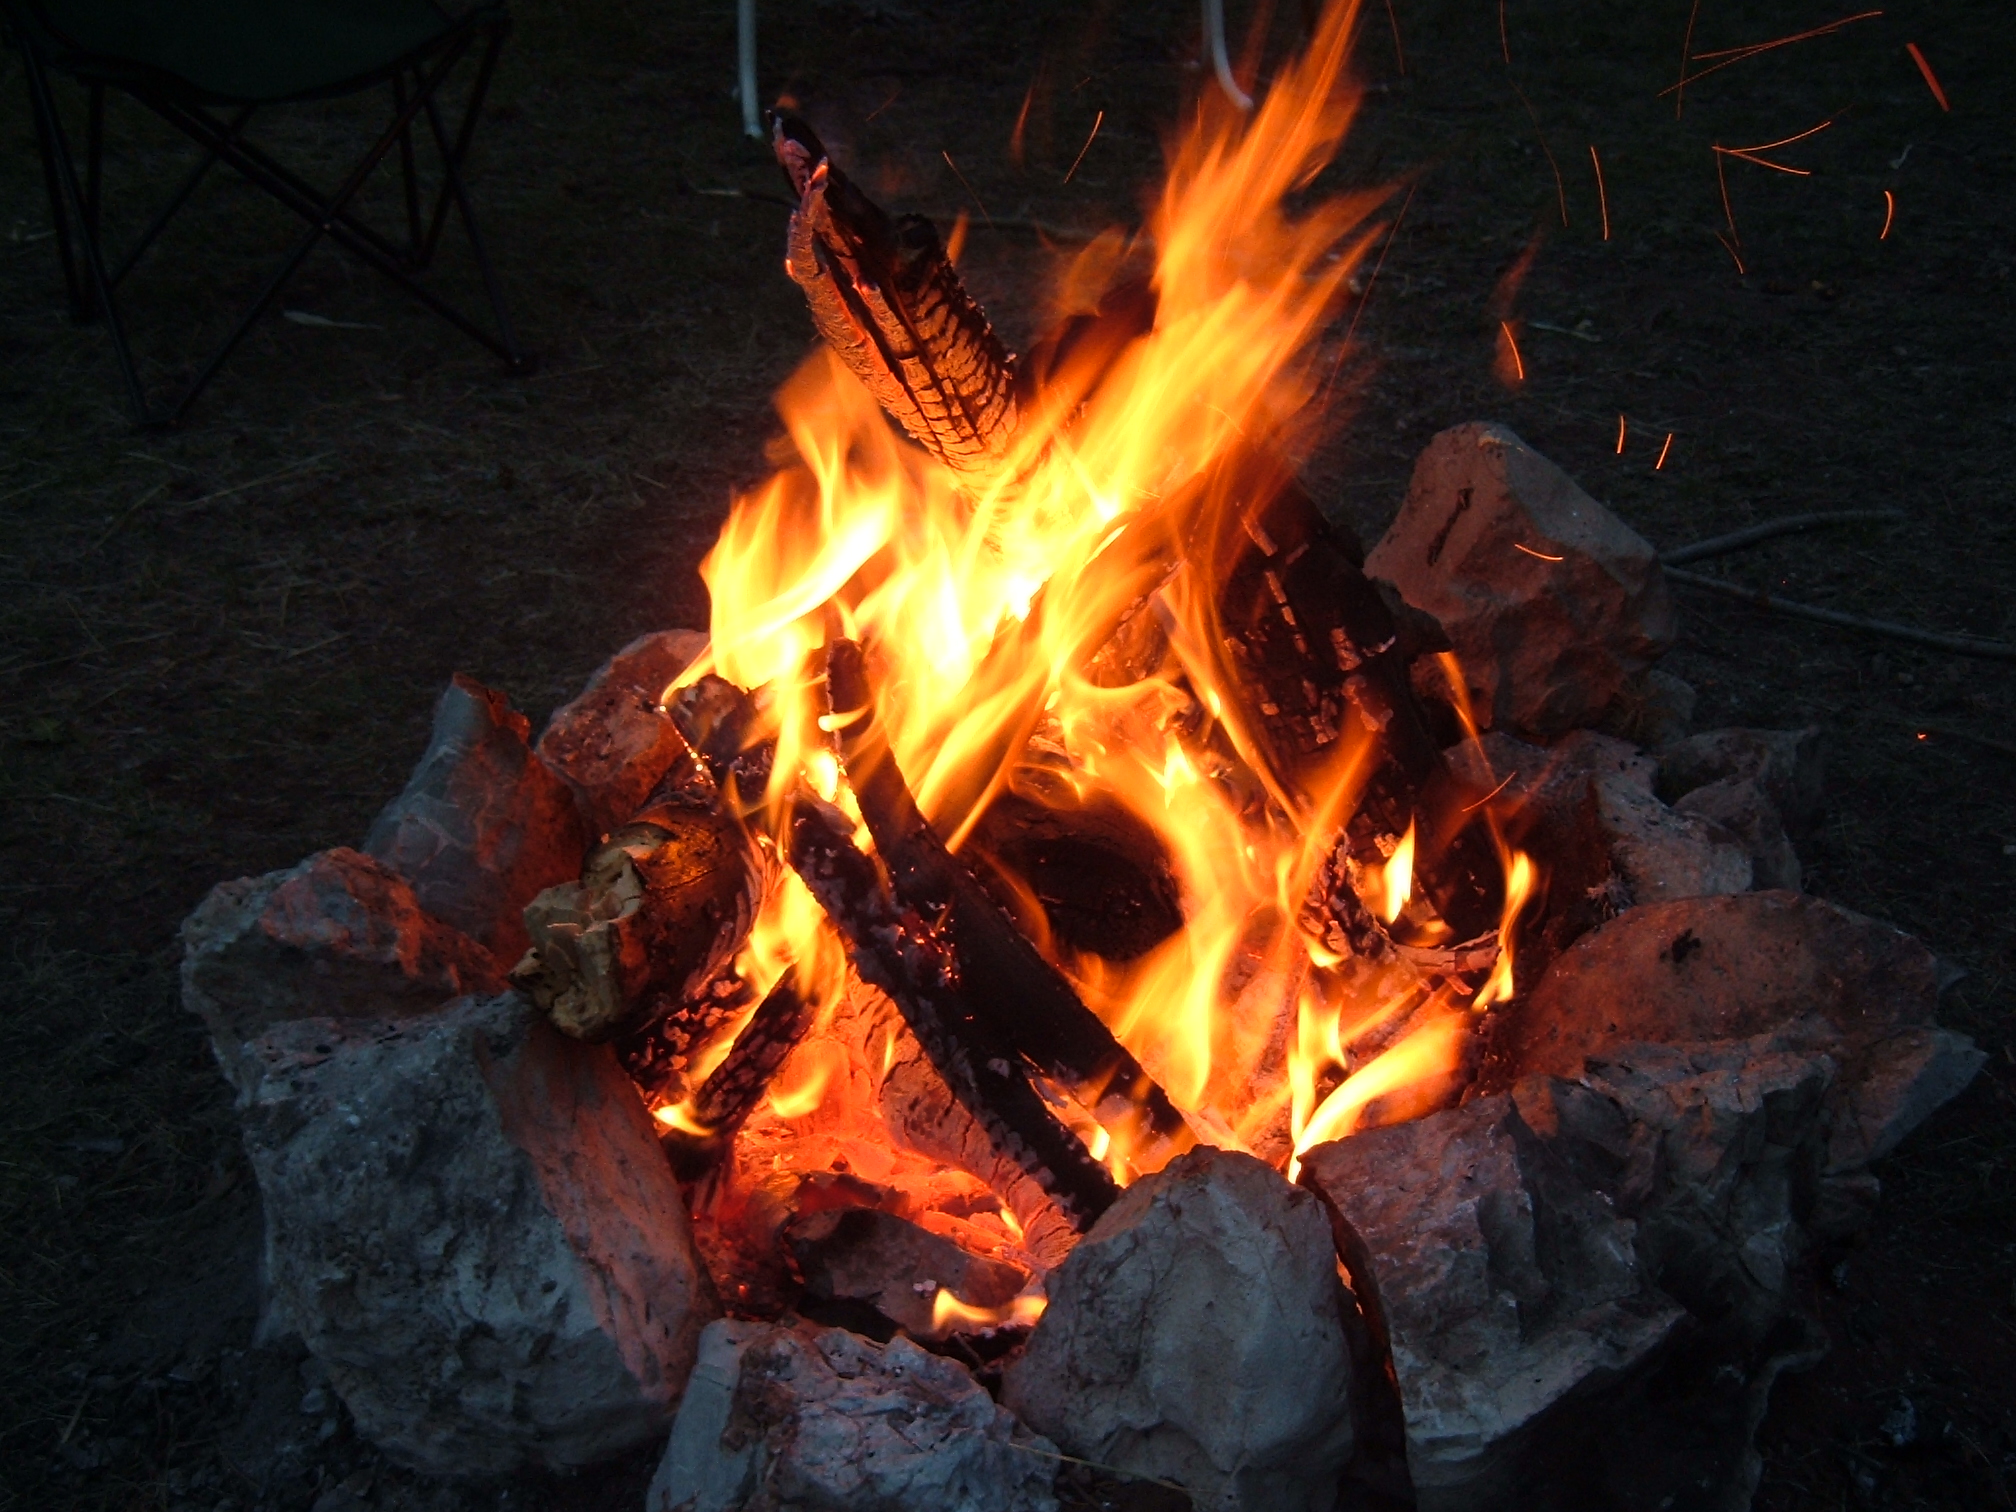 Campfire safety tips from RMCat | Rocky Mountain Catastrophe ...